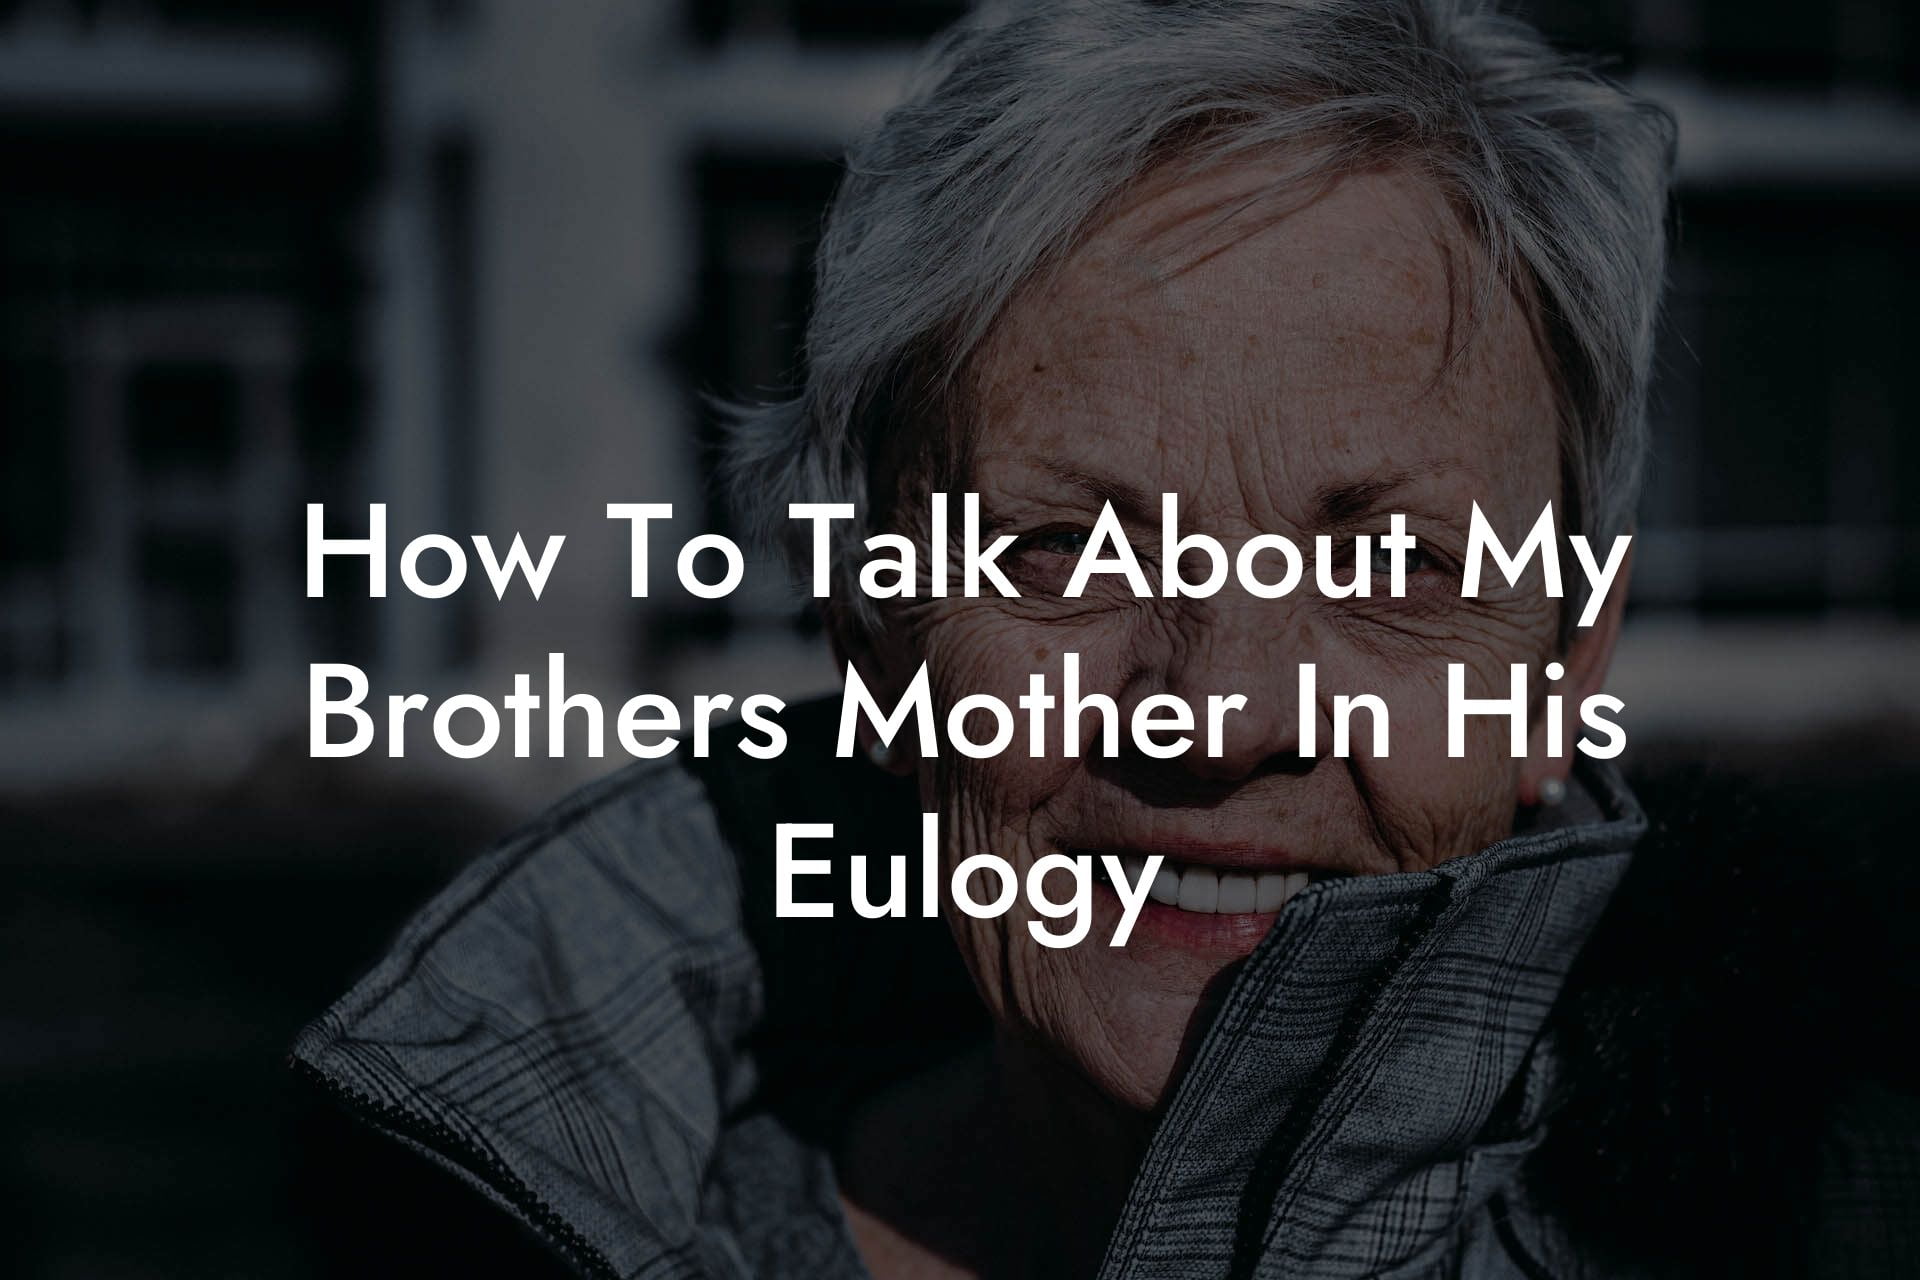 How To Talk About My Brothers Mother In His Eulogy